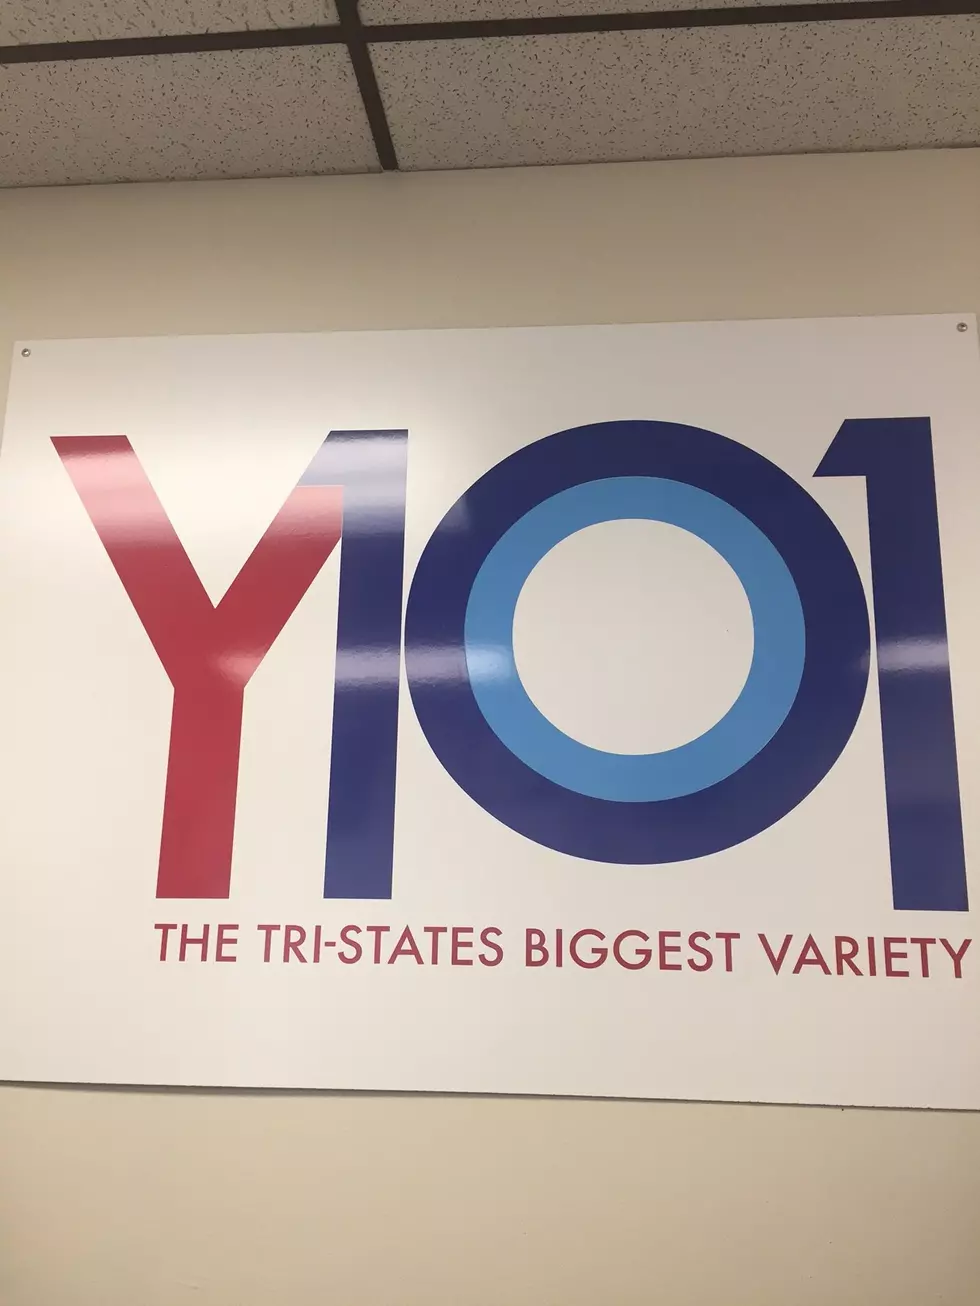 Here’s What People Are Saying About The New Y101